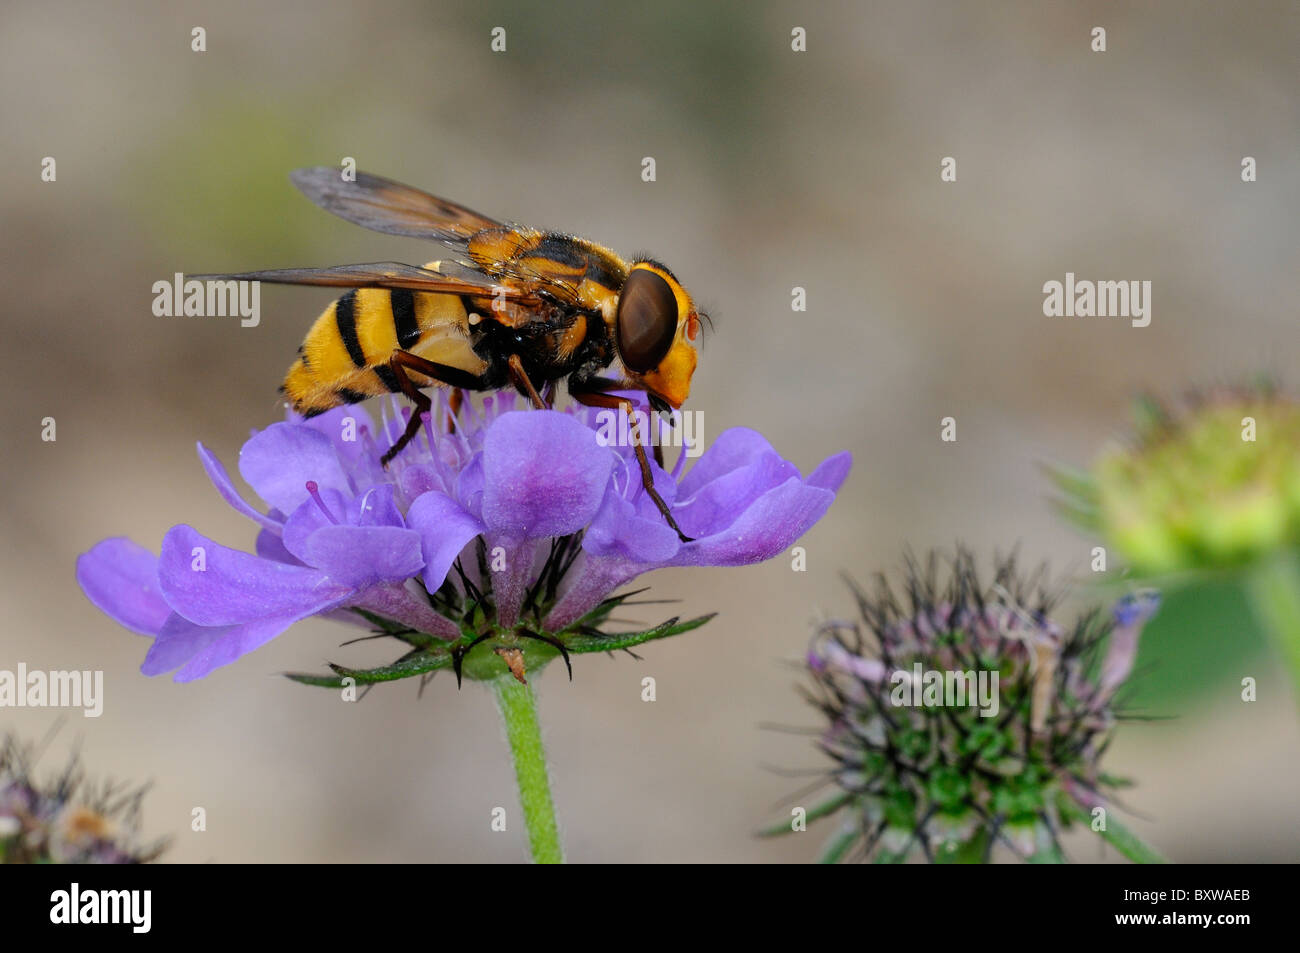 Hover-fly (Volucella species) resting on scabious flower, Oxfordshire, UK. Stock Photo